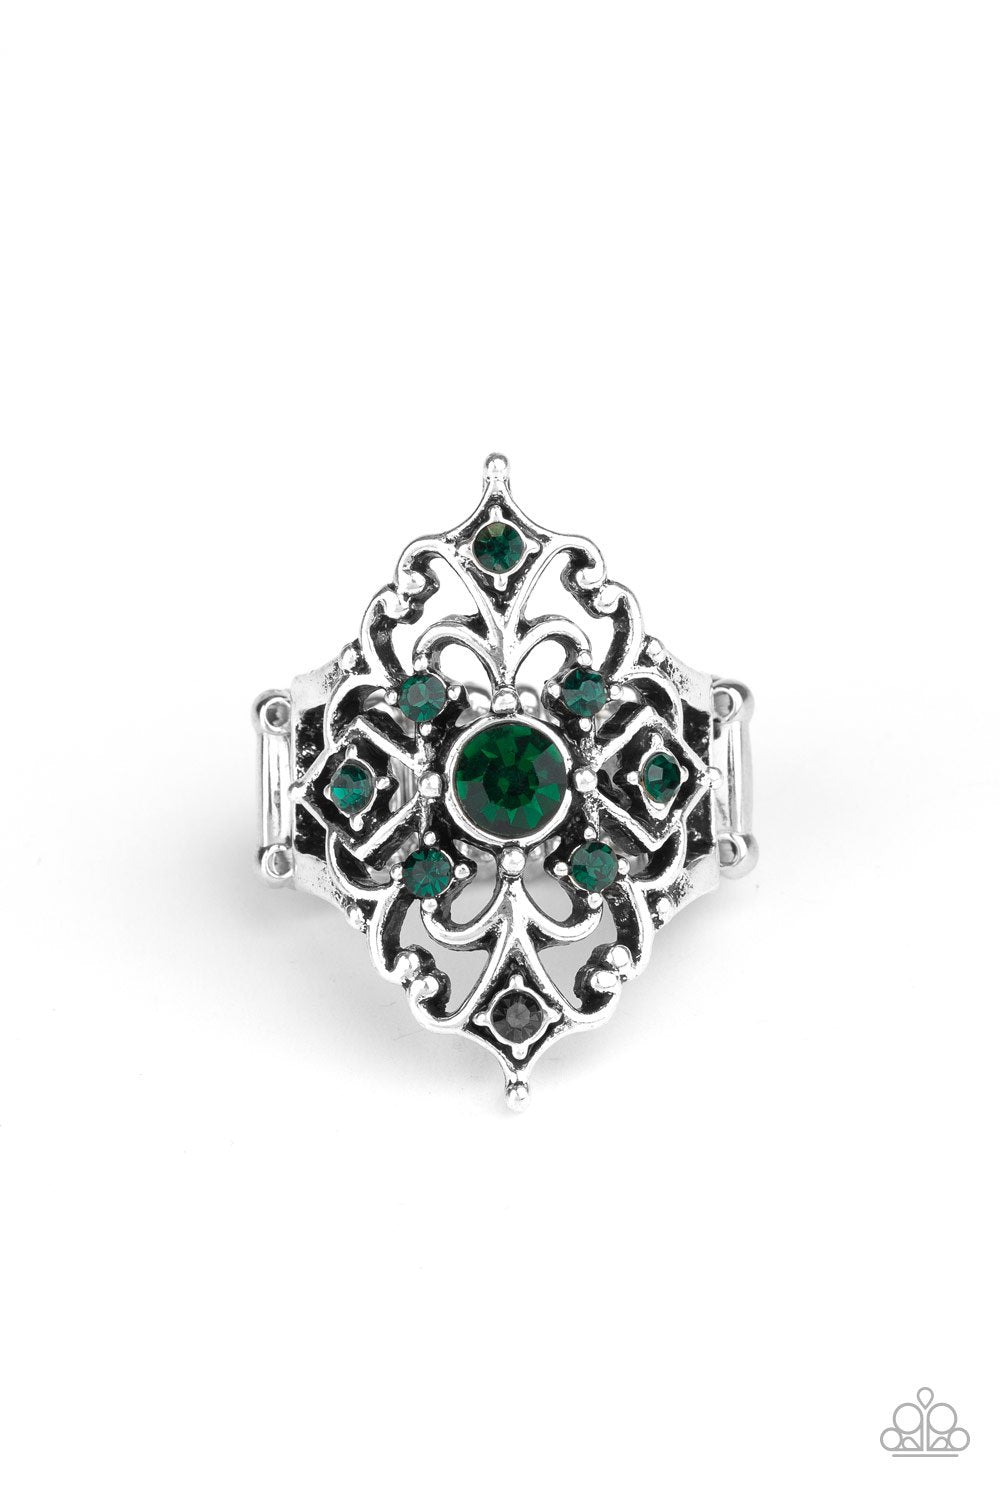 Imperial Iridescence Green Rhinestone Ring - Paparazzi Accessories-CarasShop.com - $5 Jewelry by Cara Jewels